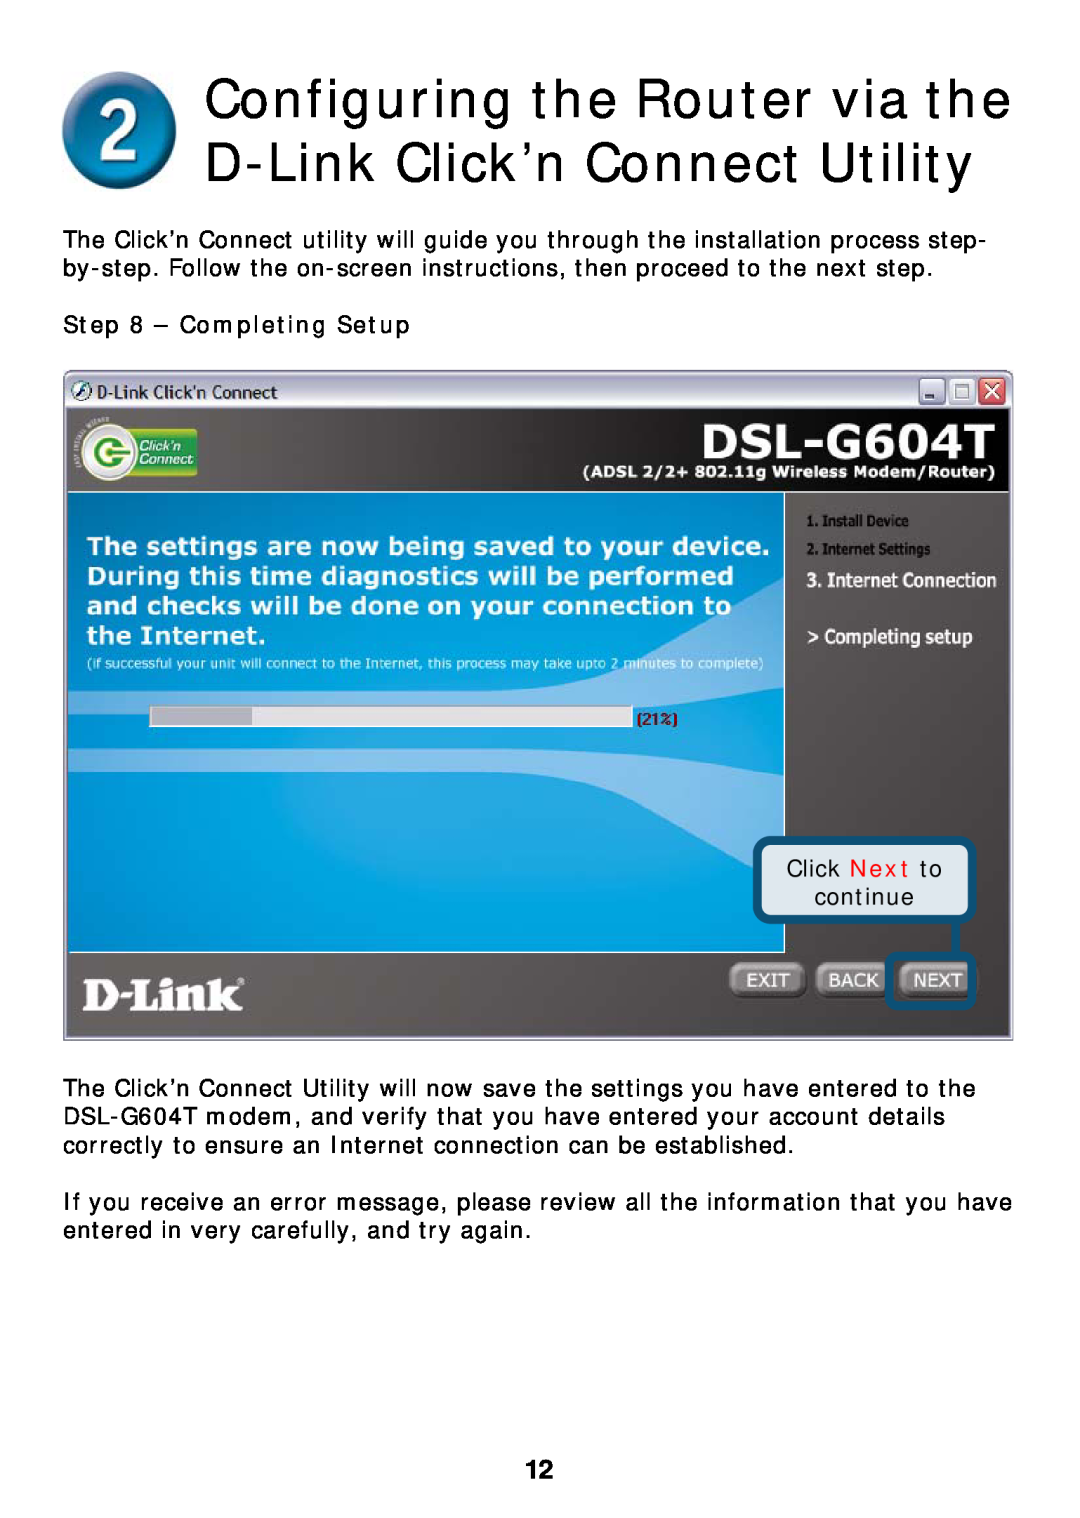 D-Link DSL-G604T specifications Configuring the Router via the D-Link Click’n Connect Utility, Completing Setup 